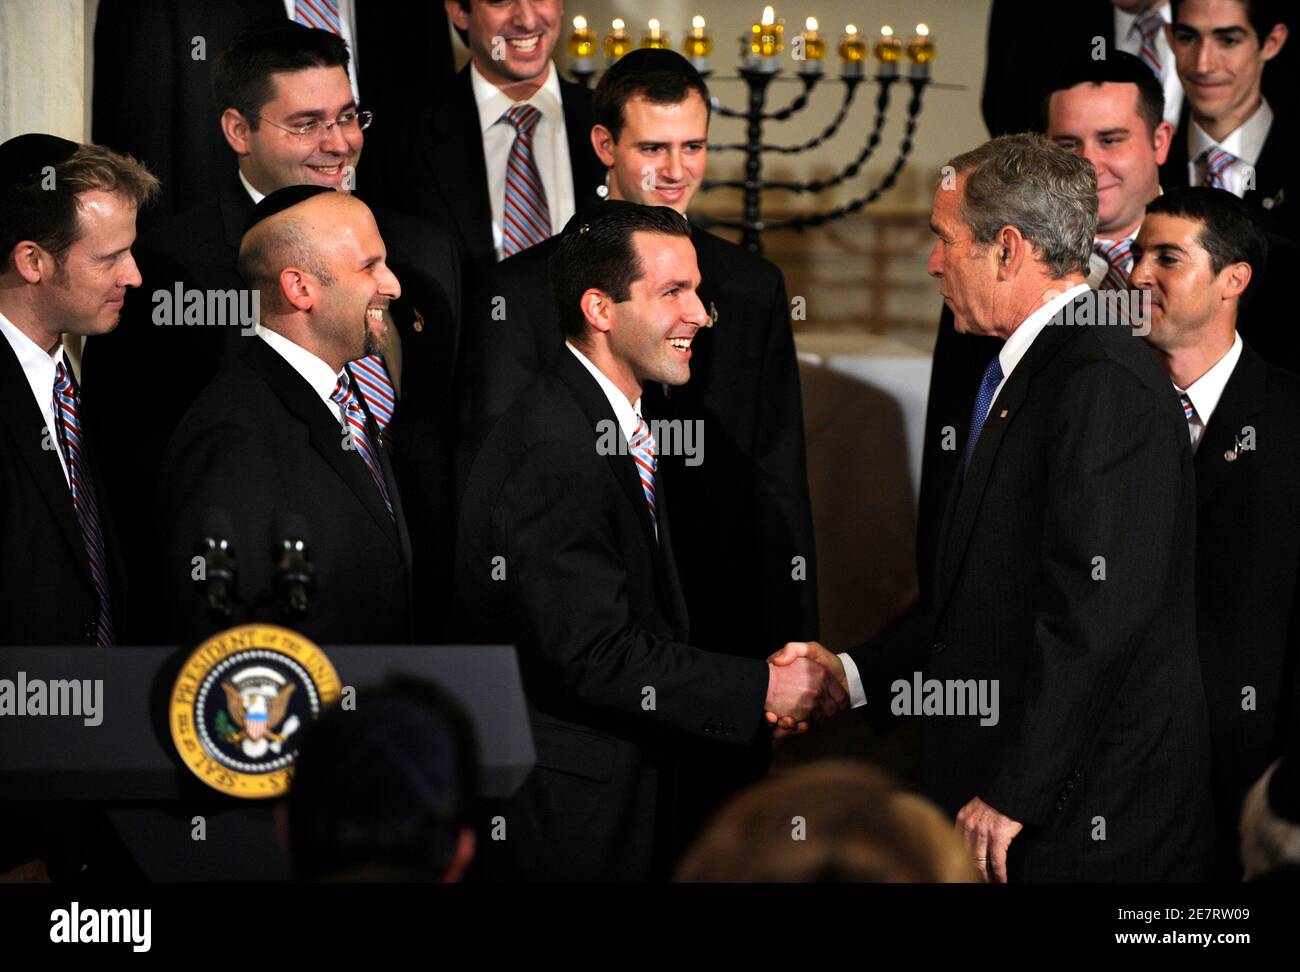 U.S. President George W. Bush greets members of Kol Zimra, a Jewish choir, after they performed for a Hanukkah event at the White House in Washington December 15, 2008. REUTERS/Mike Theiler  (UNITED STATES) Stock Photo